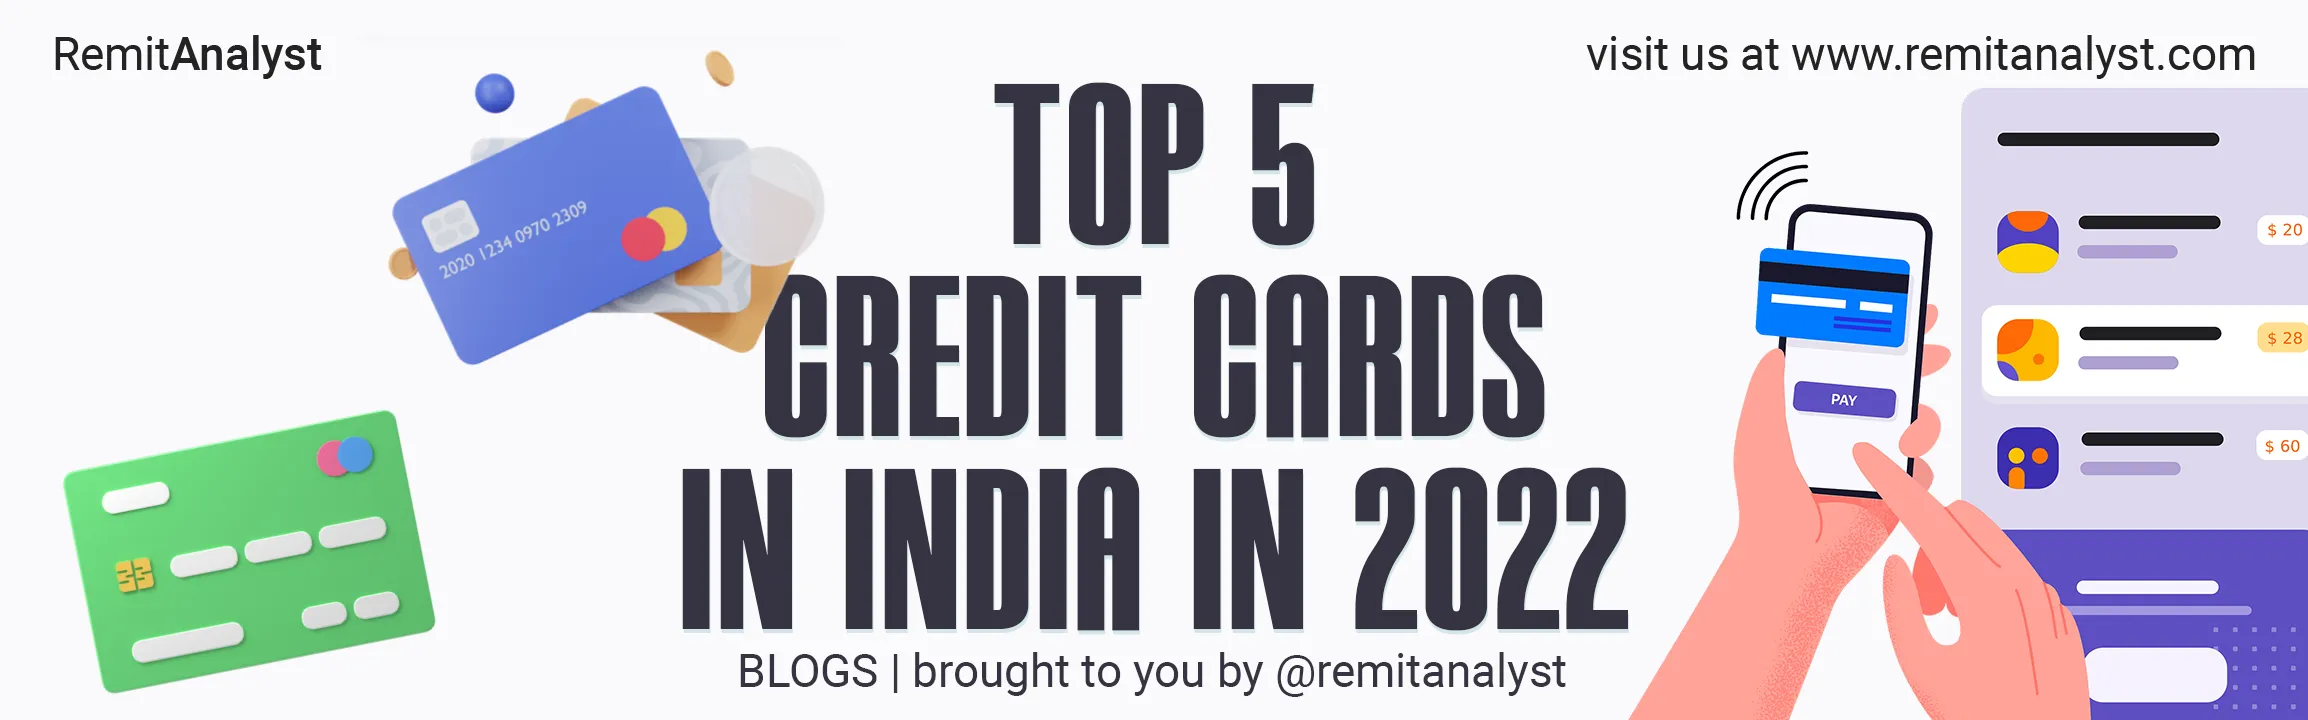 top-5-credit-cards-in-india-in-2023-title